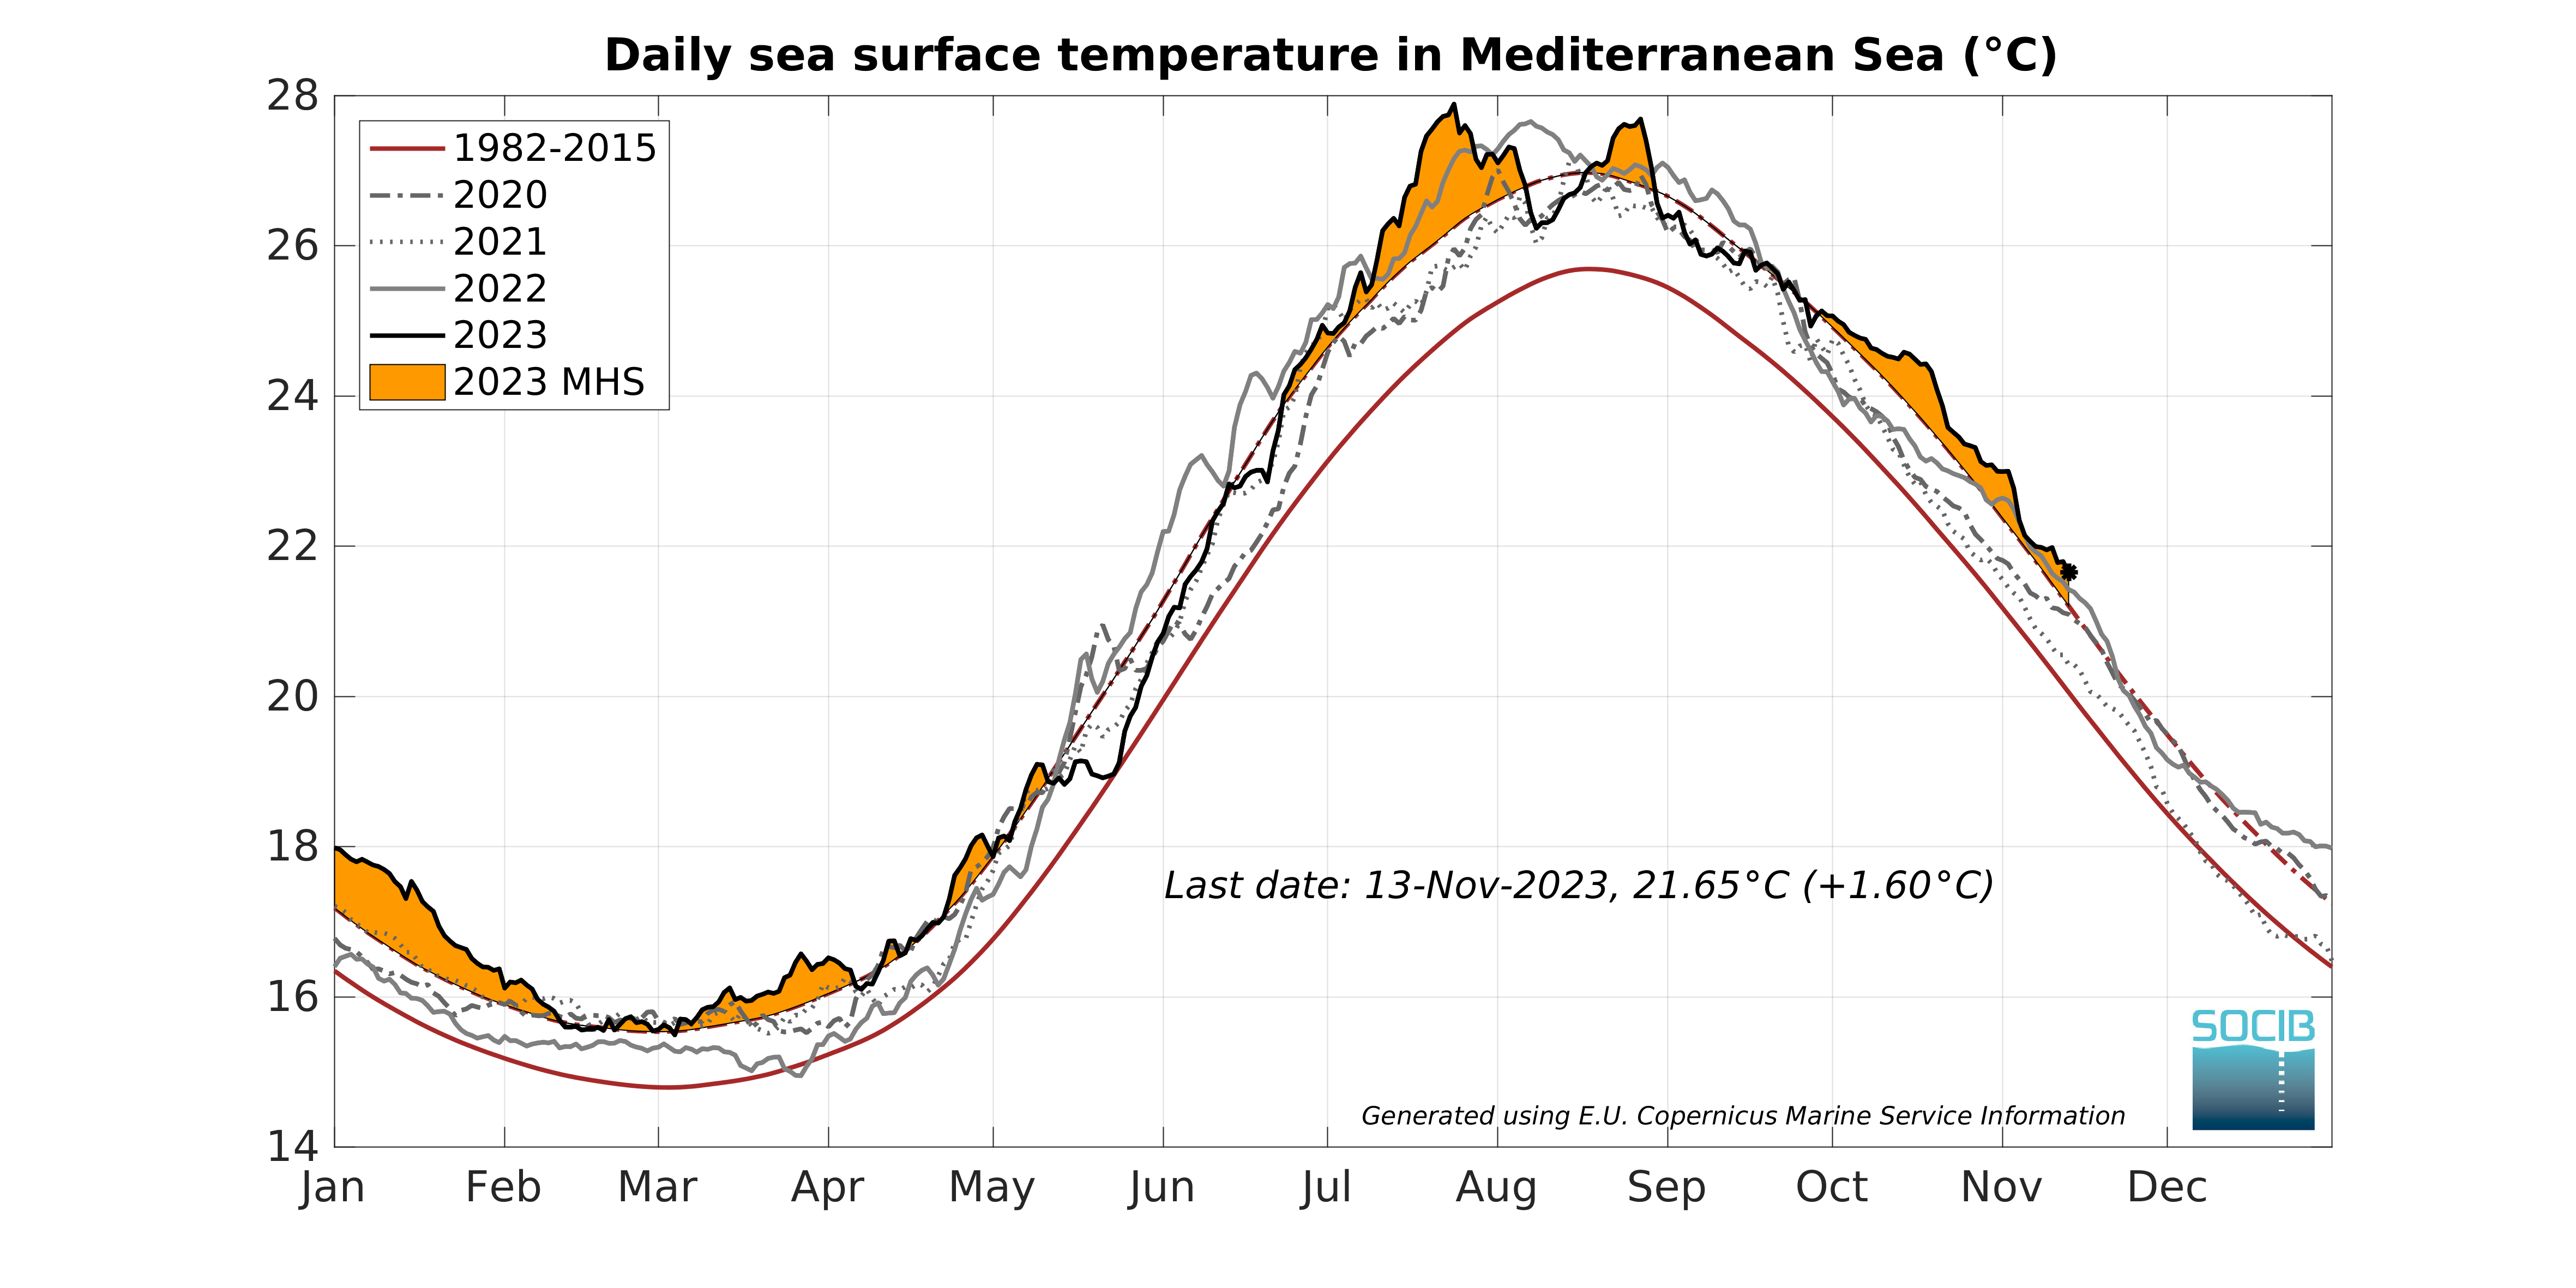 timeseries_daily_CMEMS_SST_MedSea_2020to2023.png